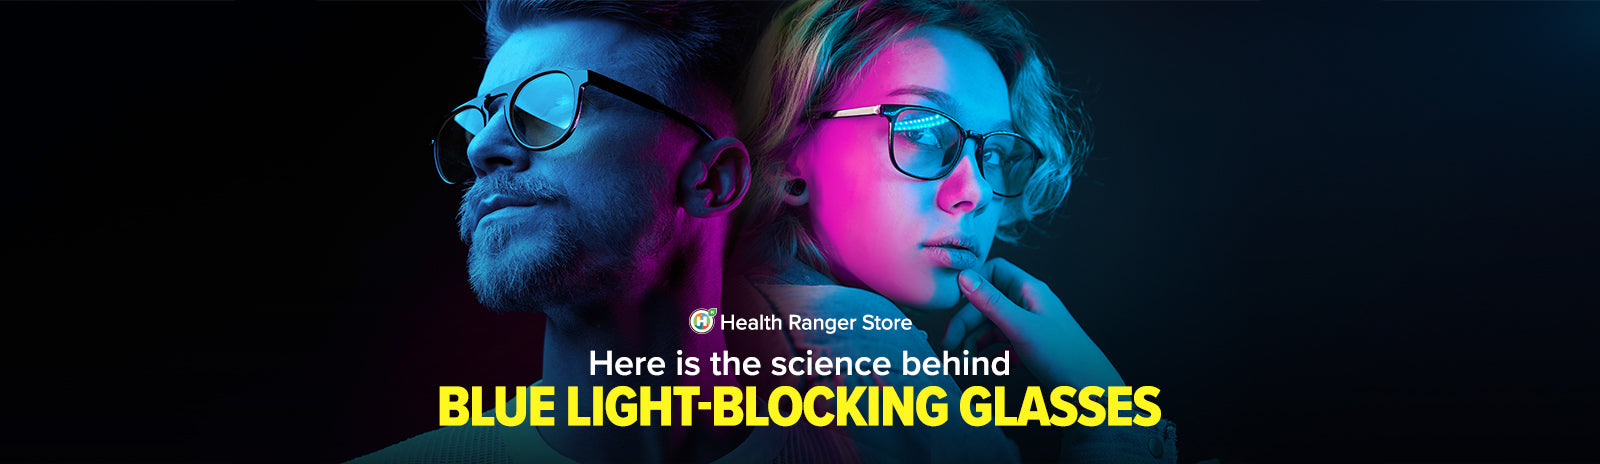 The science behind blue light-blocking glasses